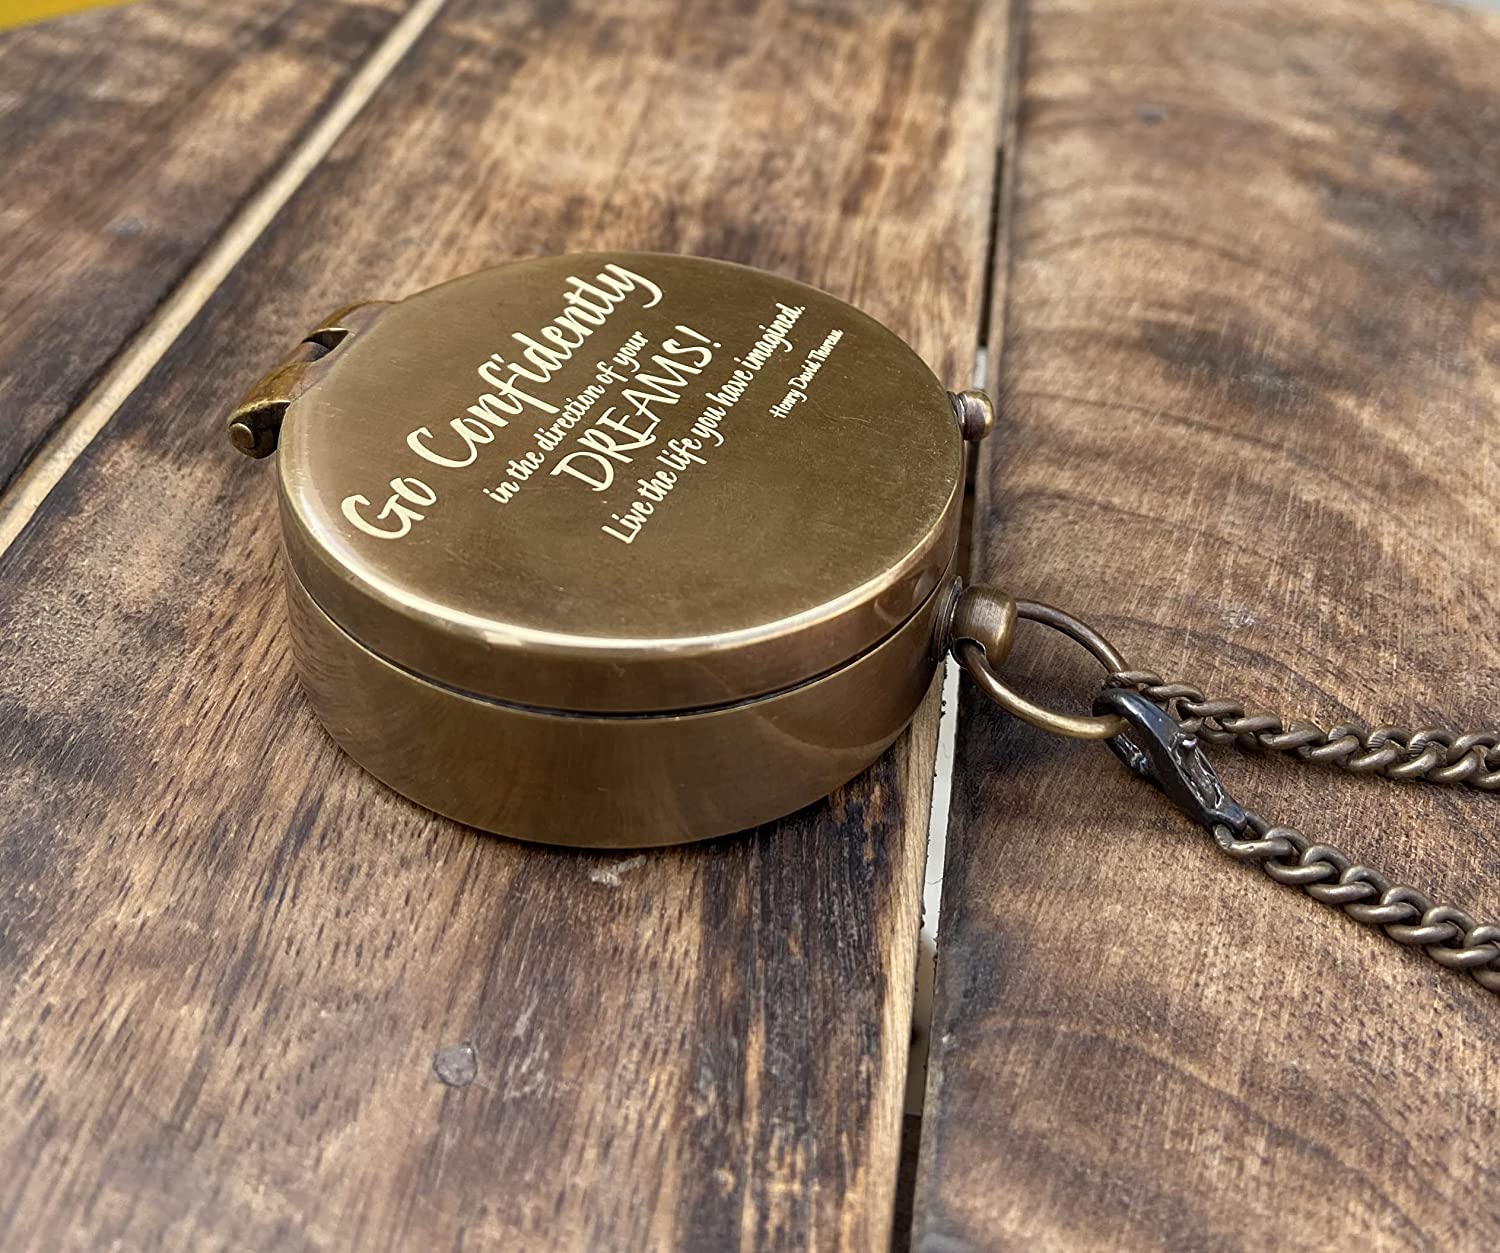 Inspirational gift compass for Son from Mom - Engraved pocket compass with leather pouch, Go confidently compass, Christmas, Graduation, birthday, hiking, camping gift for beloved son